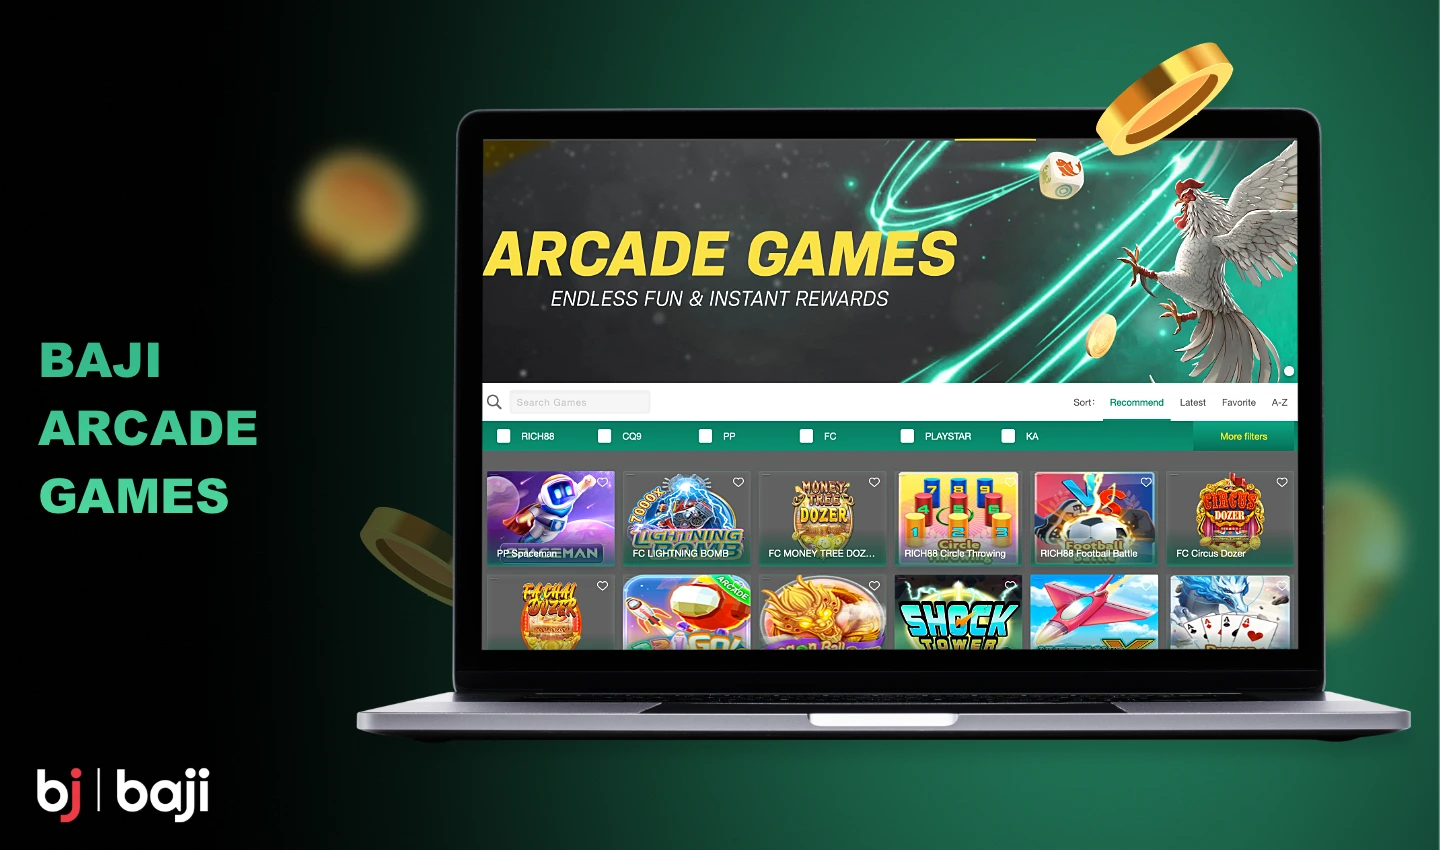 Baji Casino has a huge collection of arcade games that are available to registered users